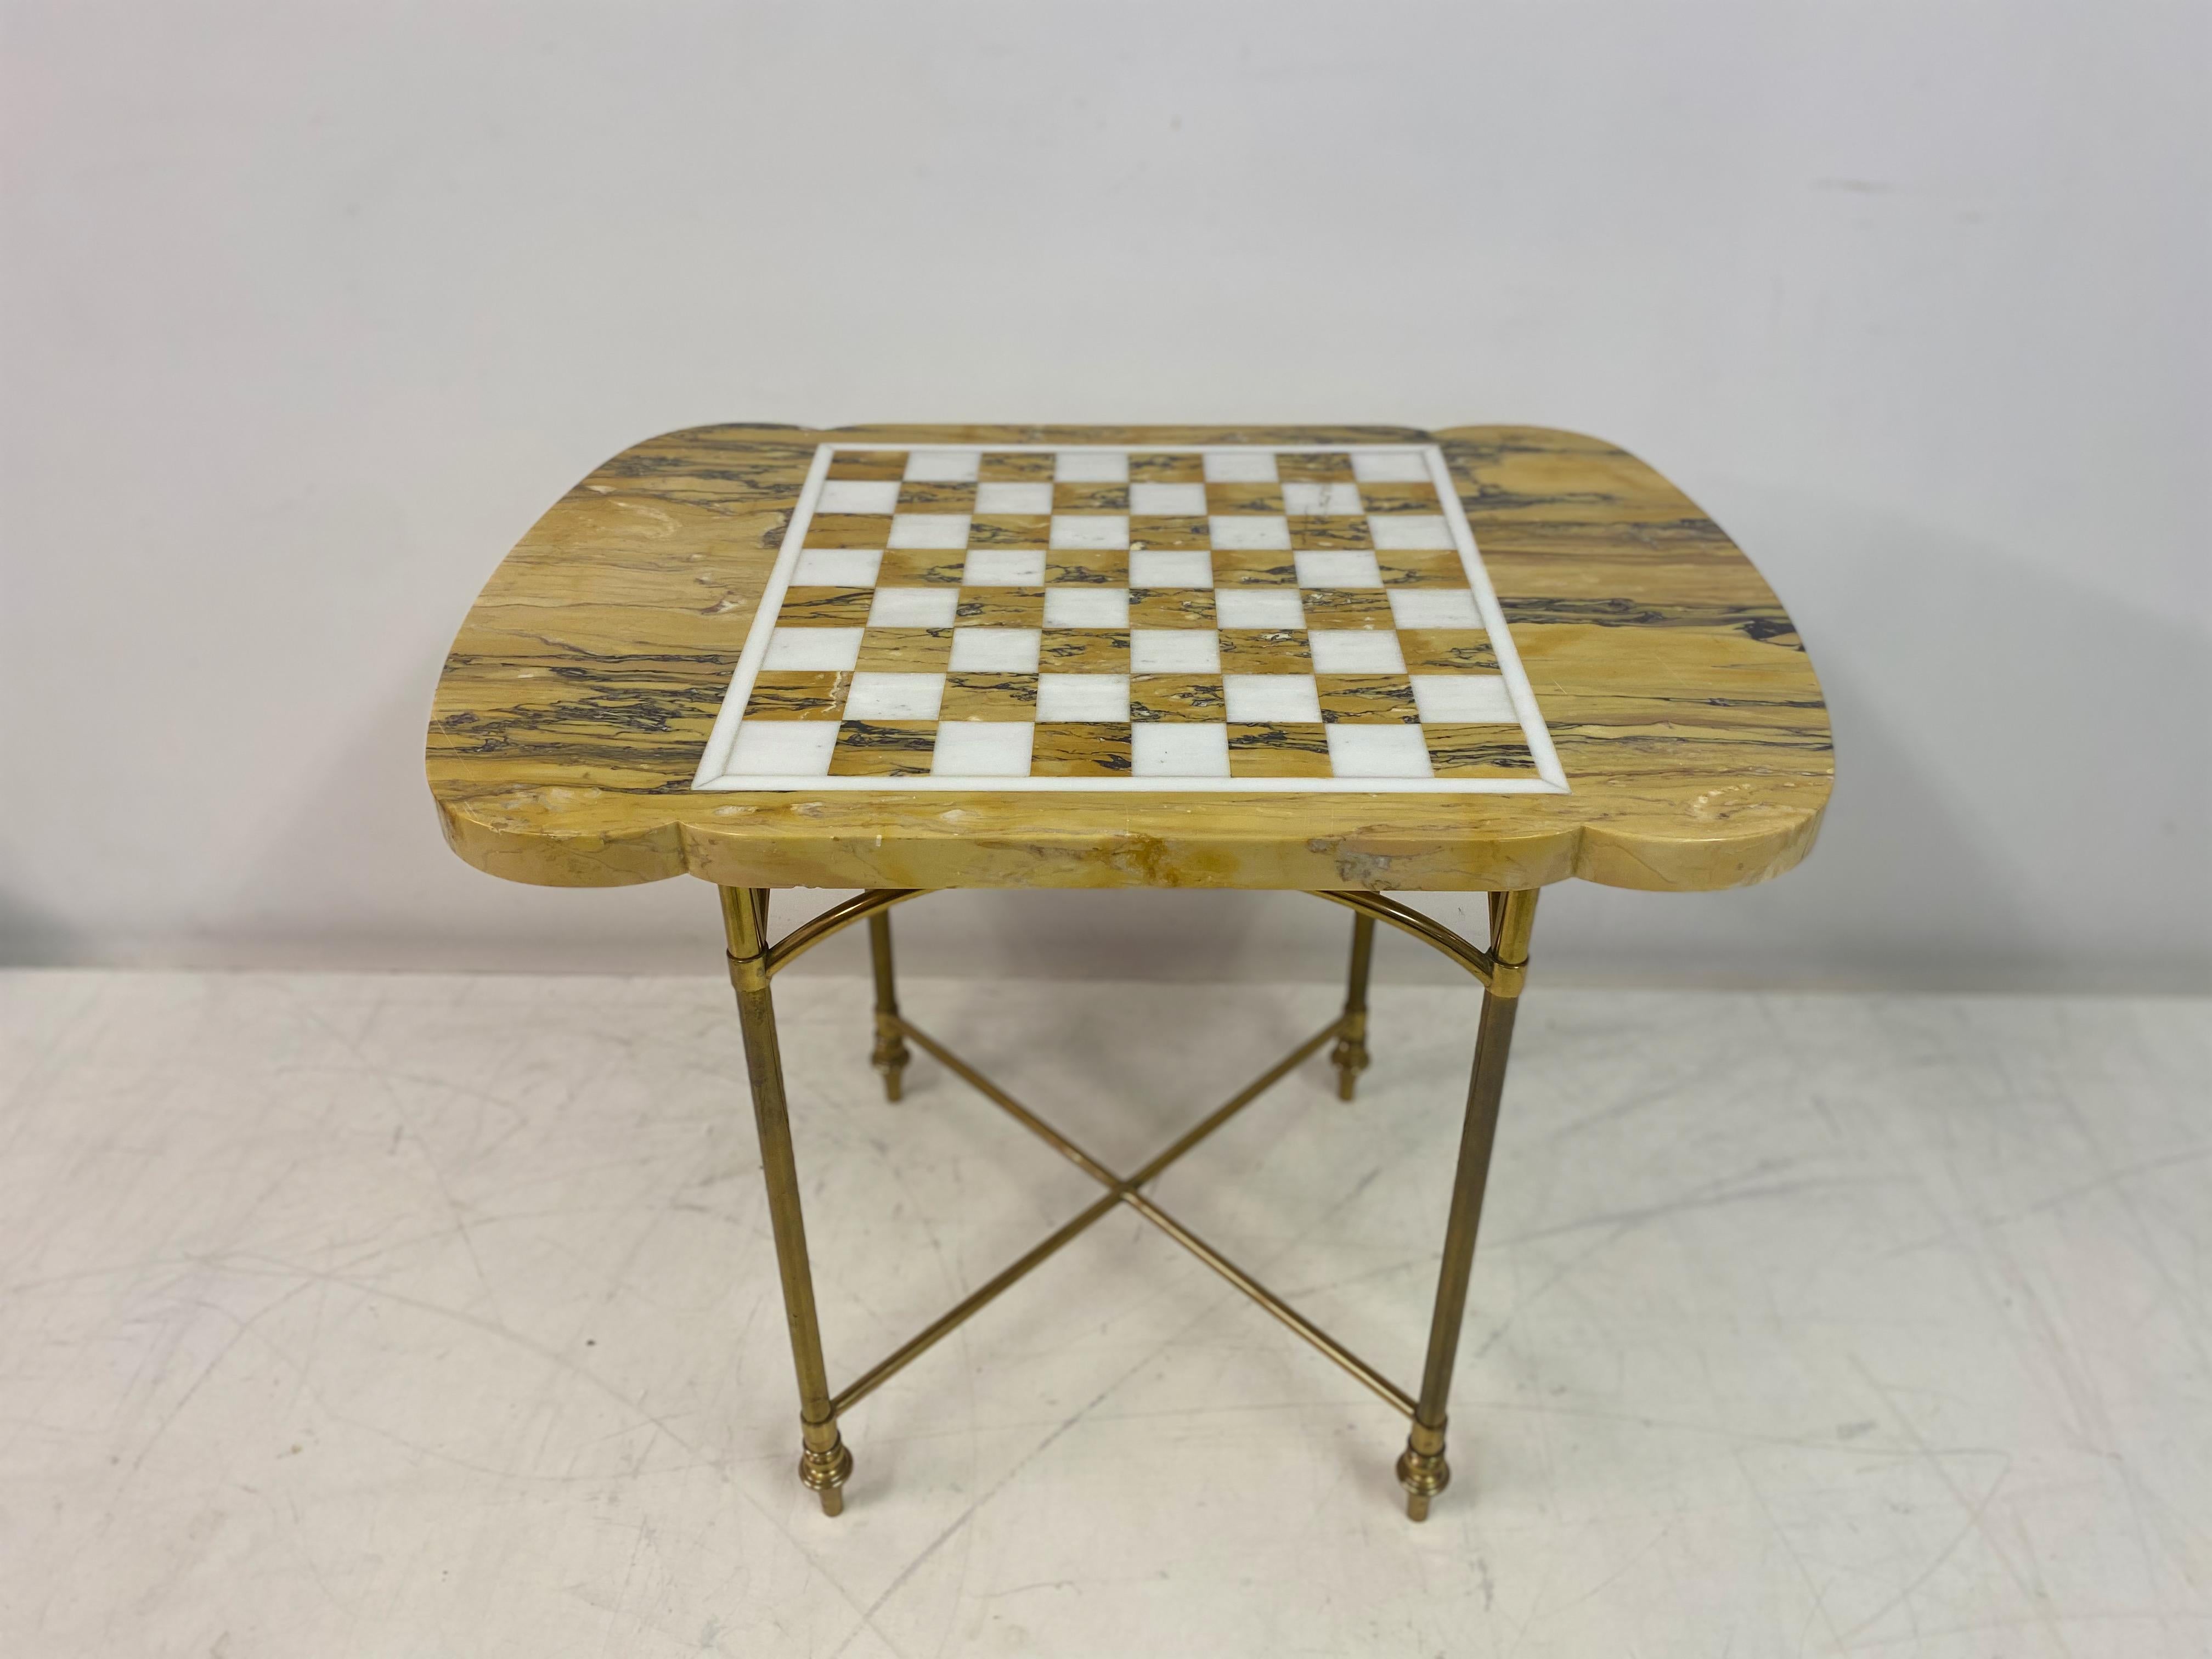 Games table

Brass frame

Marble top

Shaped ends

Mid to late 20th Century.